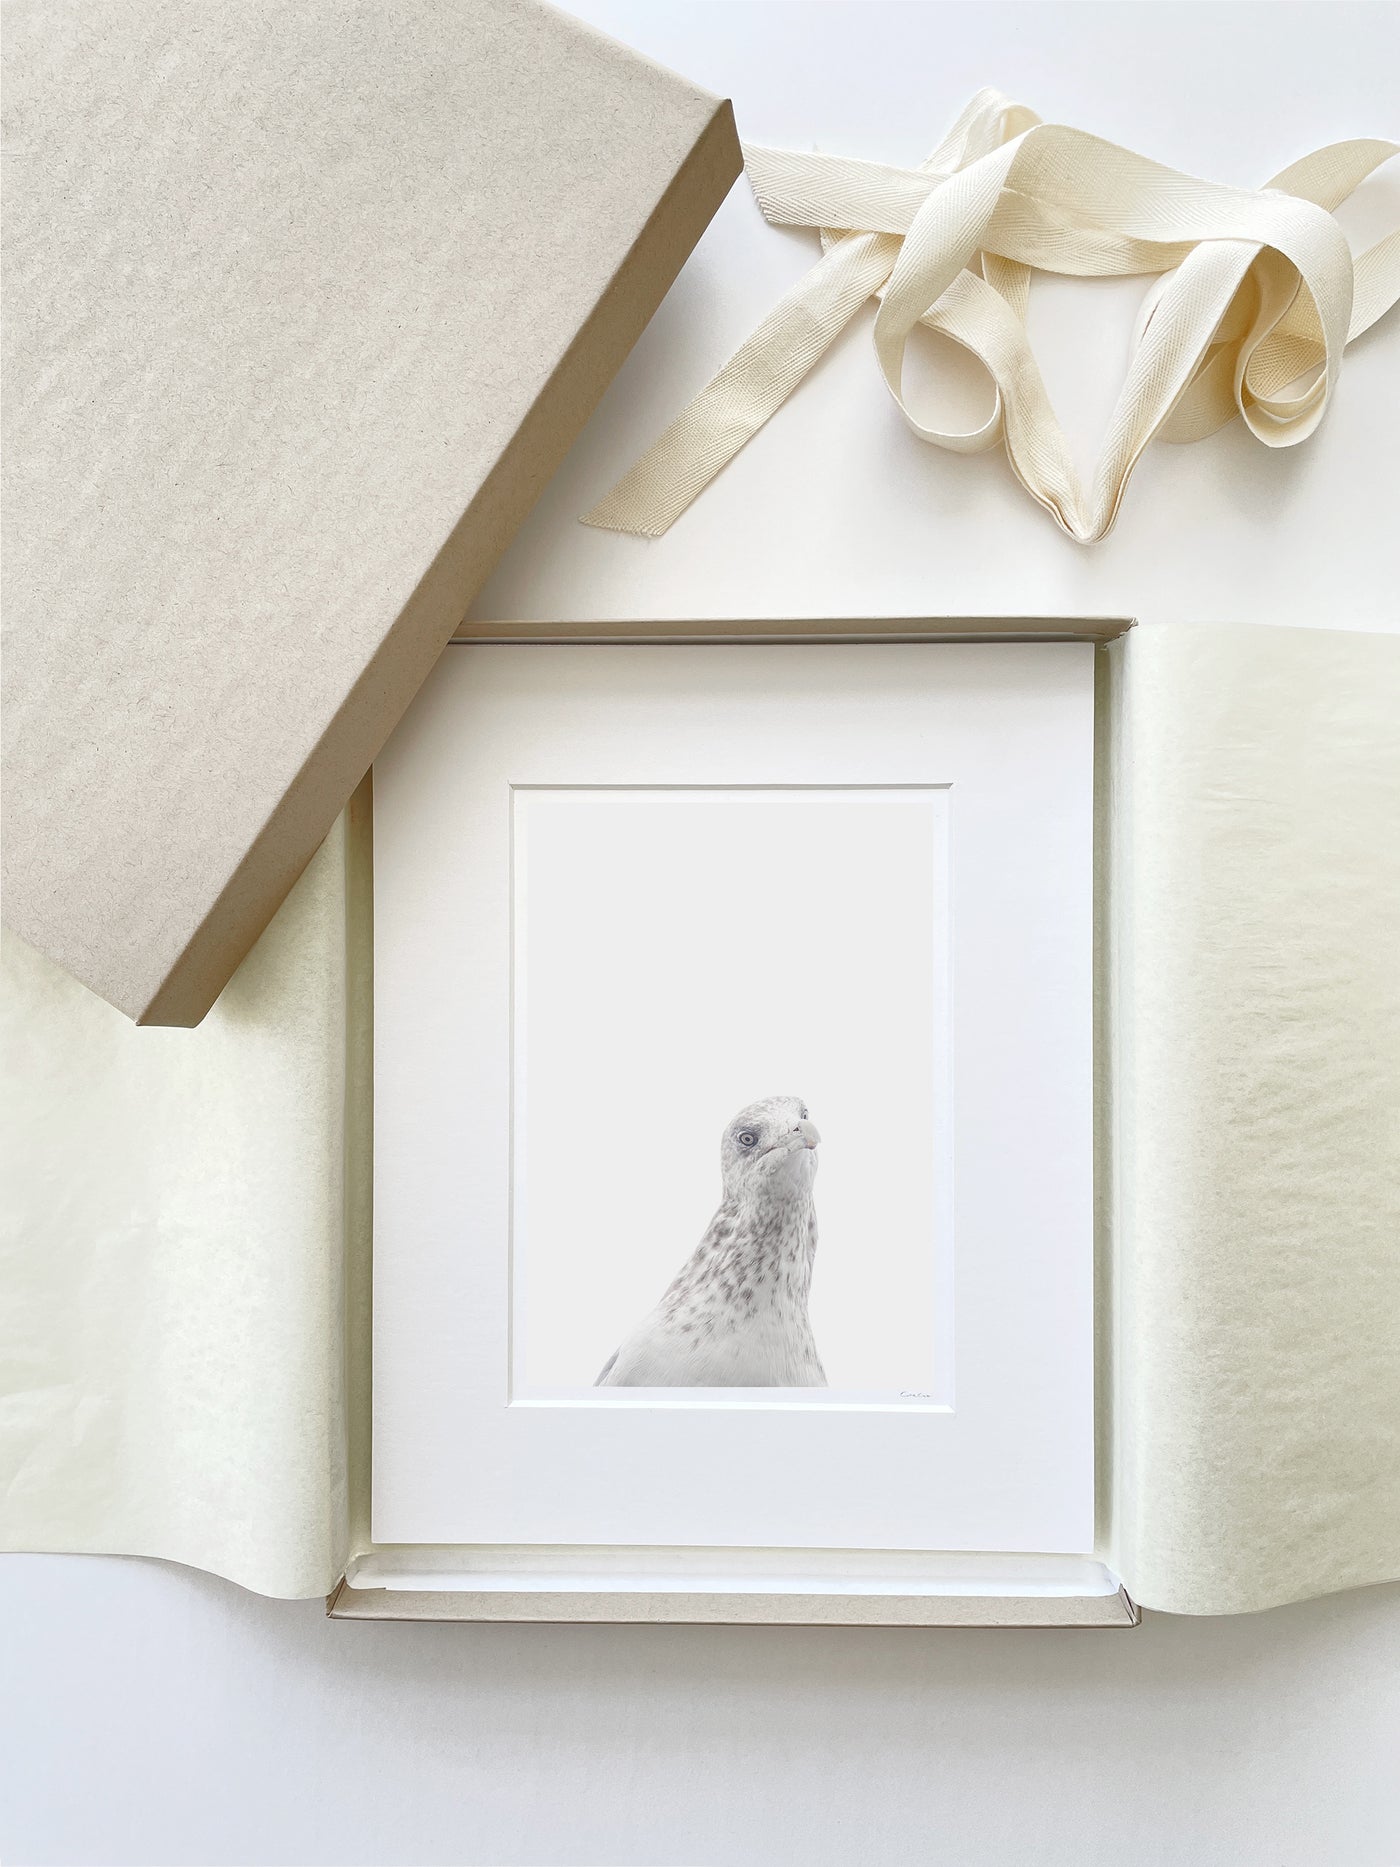 Seagull - Boxed gift fine art print by Cattie Coyle Photography